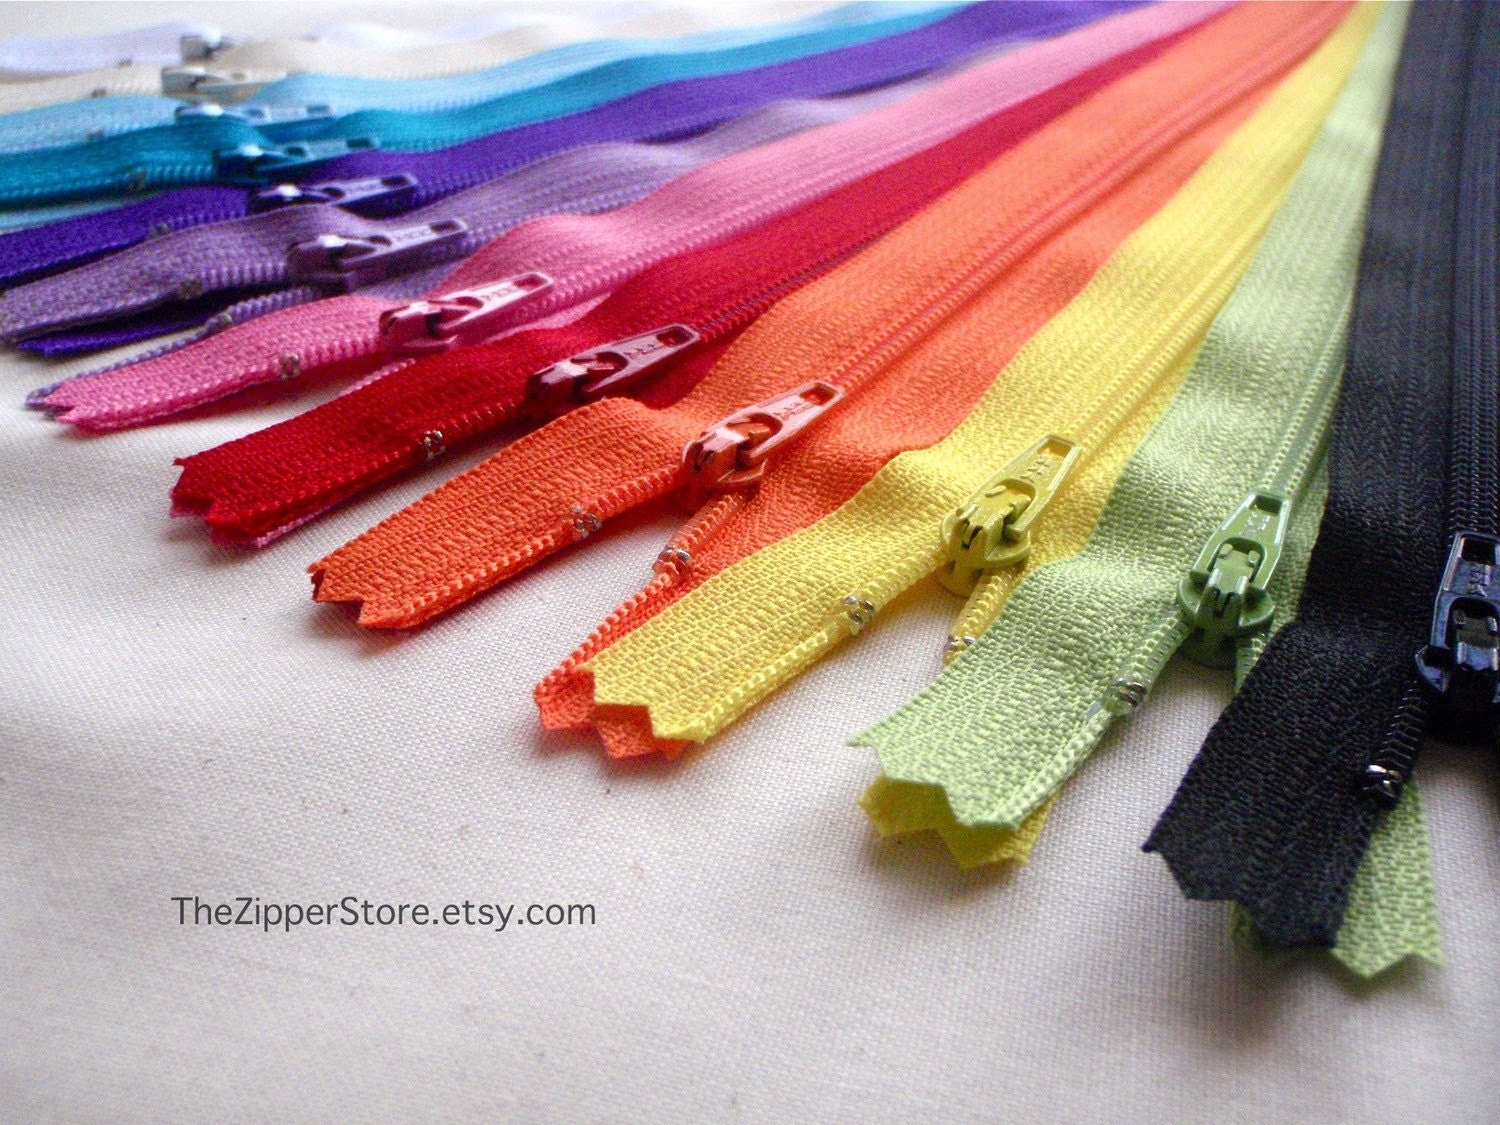 100 Wholesale Bulk Pack of 9 inch YKK Zippers - YOUR CHOICE